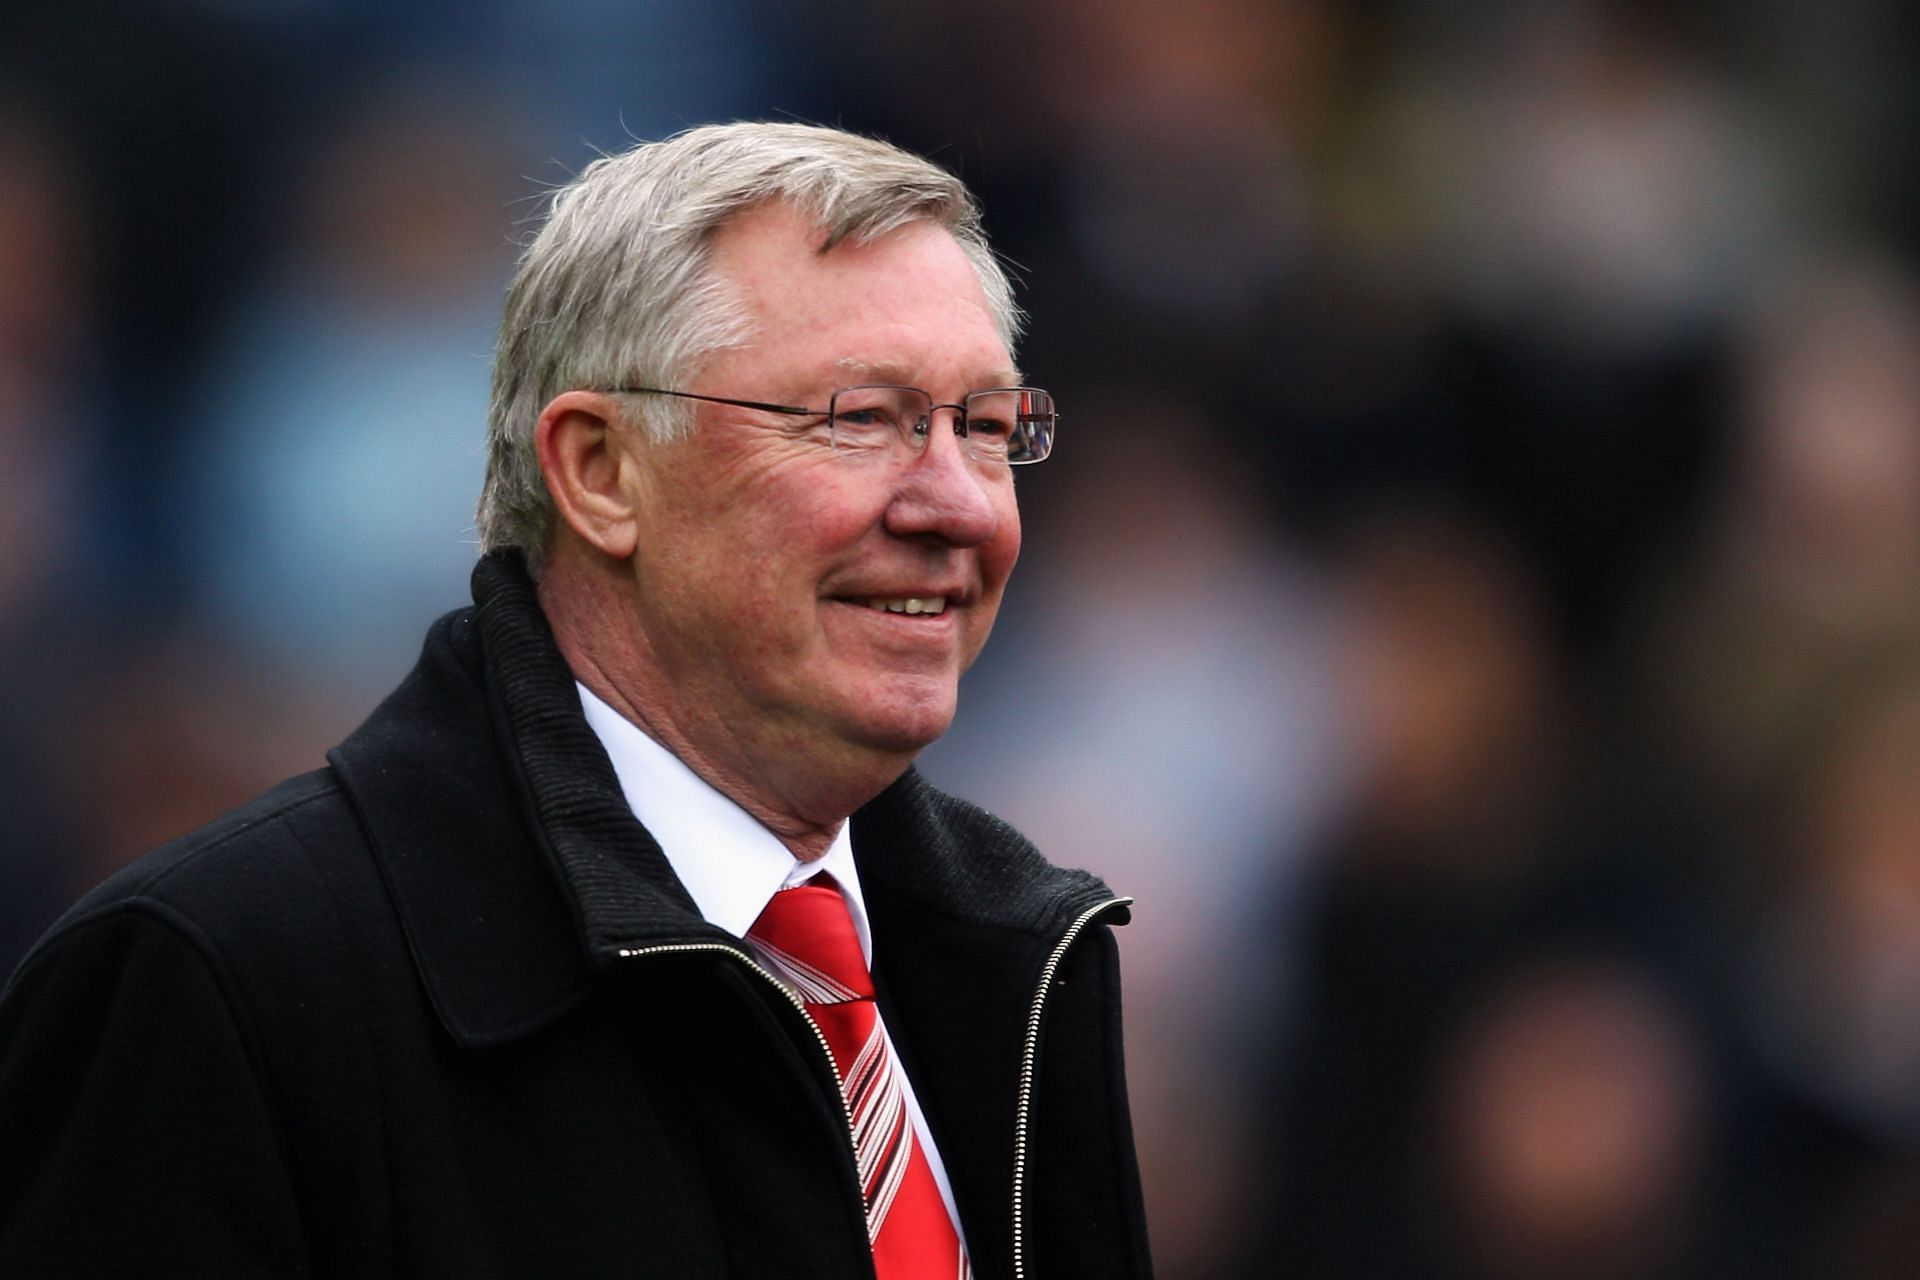 Sir Alex Ferguson - the longest-serving manager in English football history